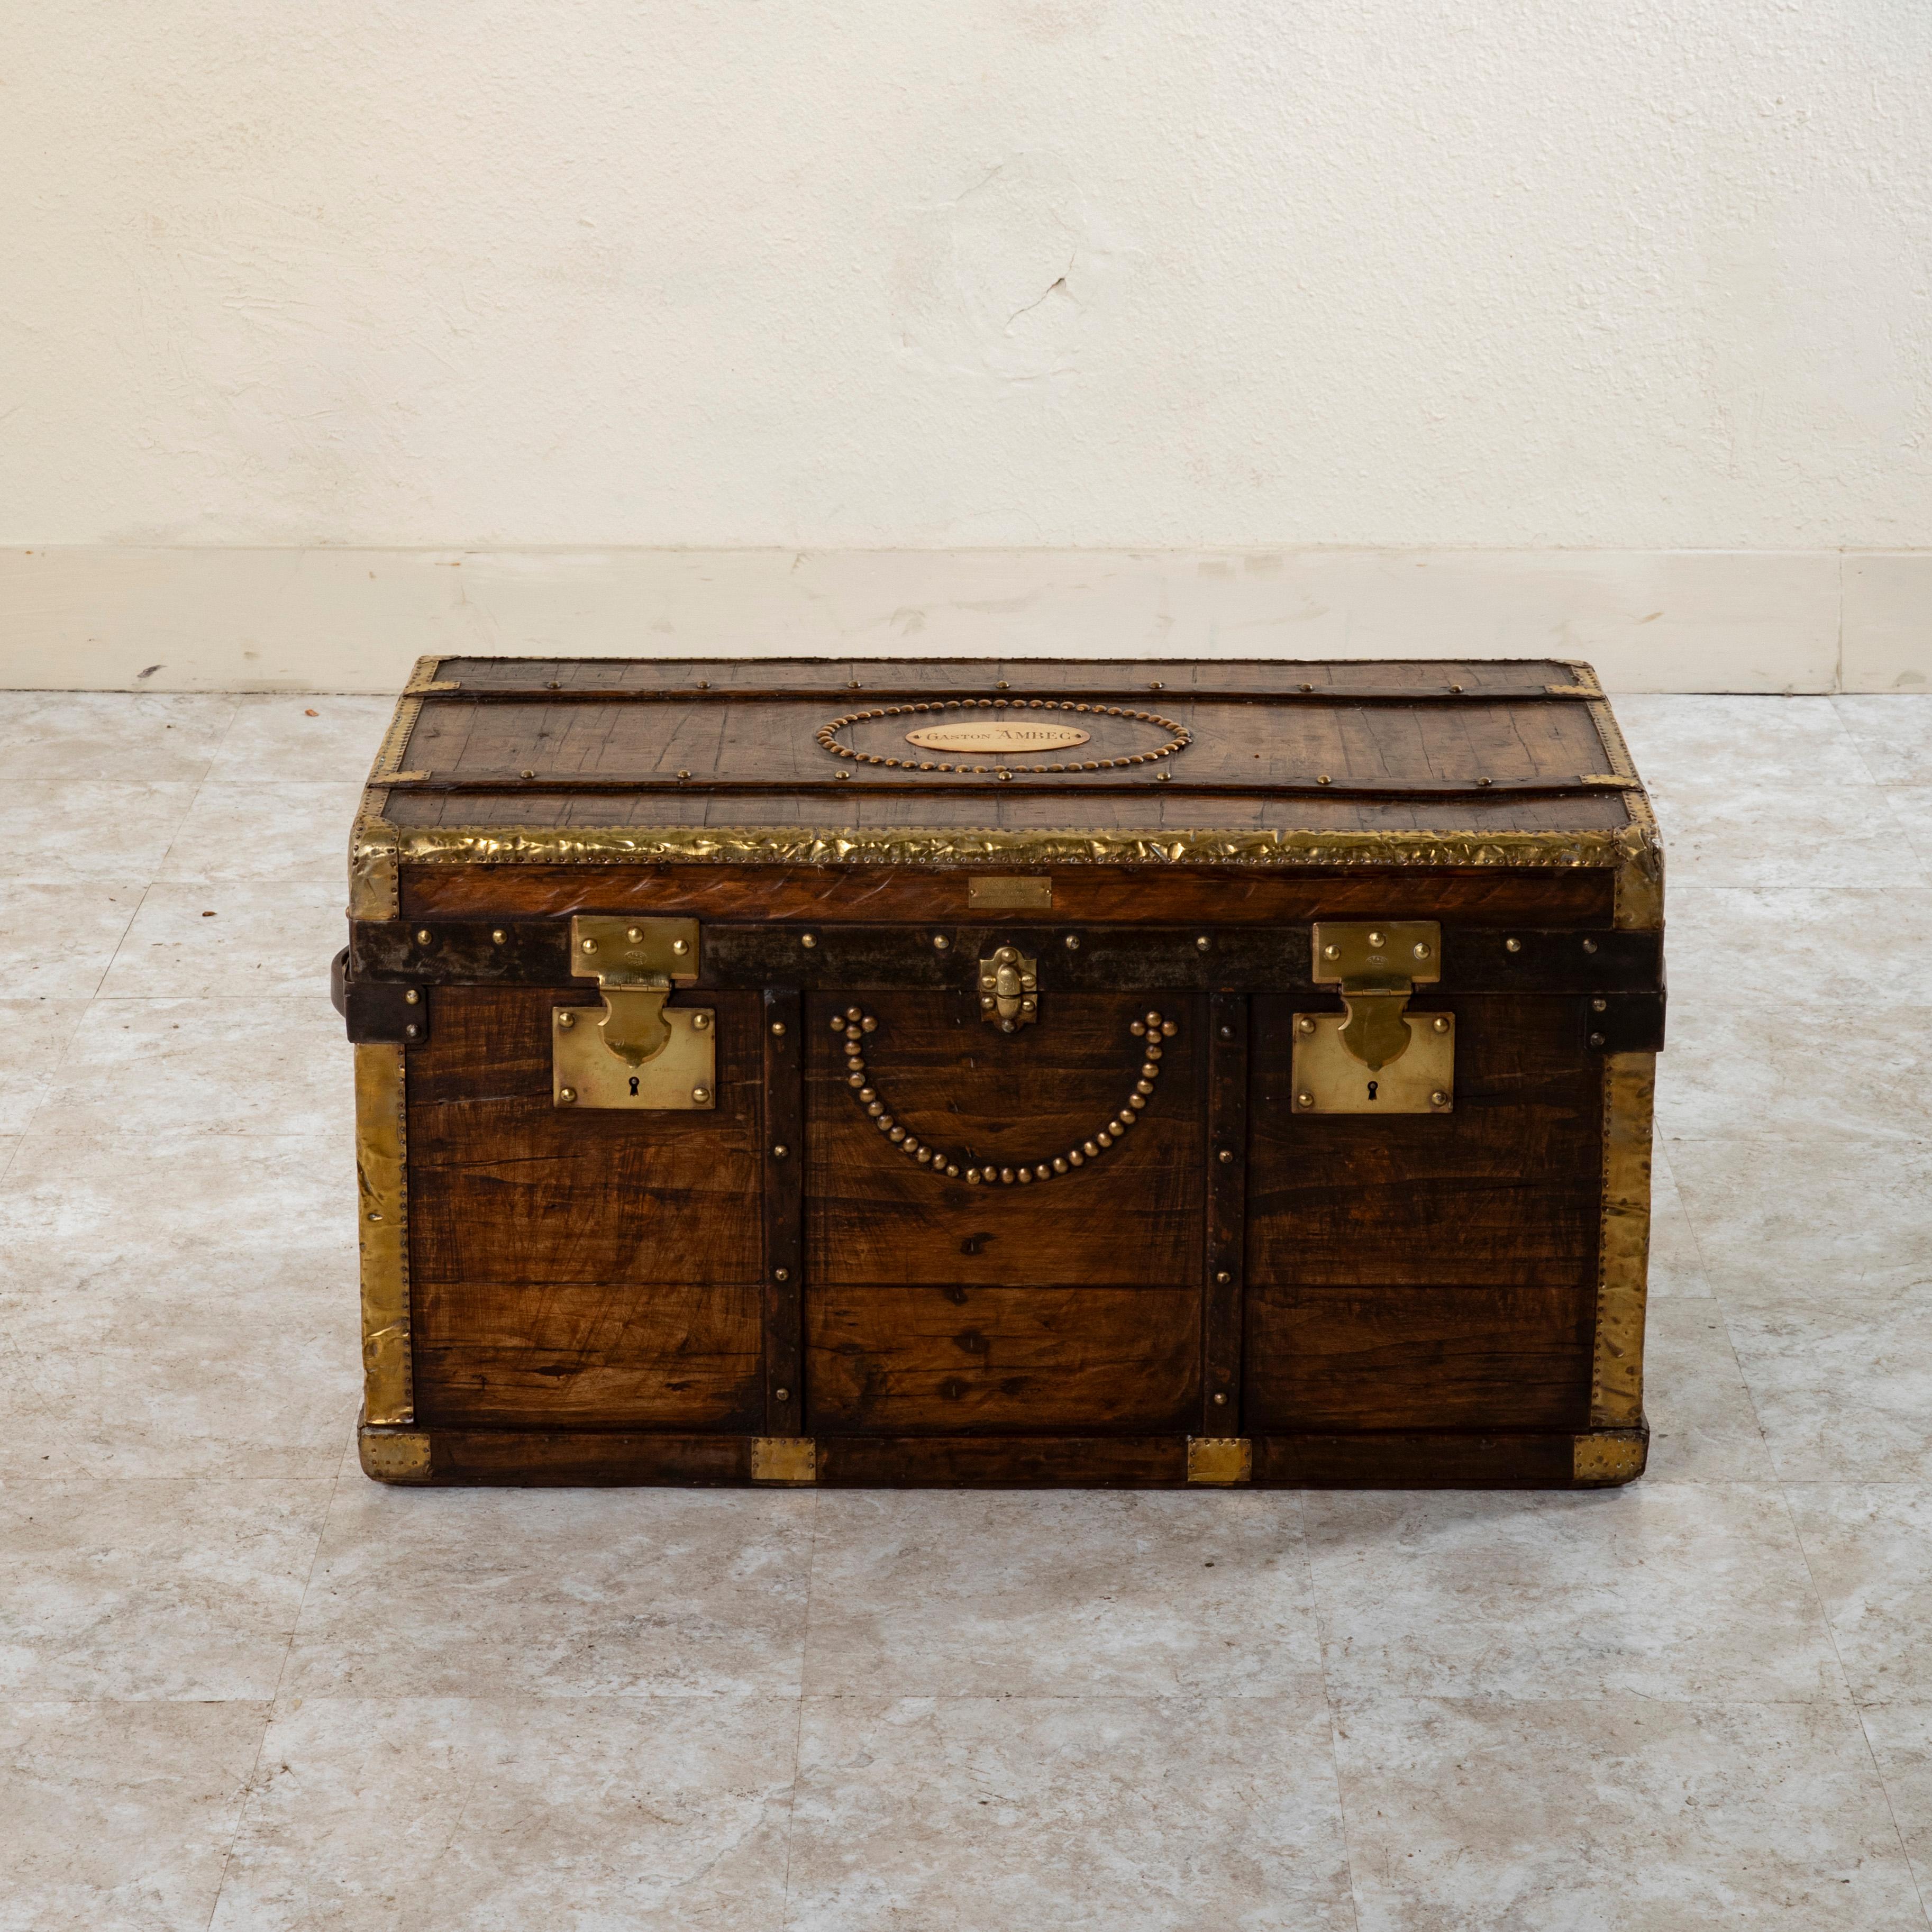 This wooden steam trunk from the late nineteenth century features locks stamped Depose, or trademarked, as well as a brass plaque marked Craeser, Malles & Maroquinerie, Laussanne (Suisse), the name of the manufacturer in Switzerland. The oval brass